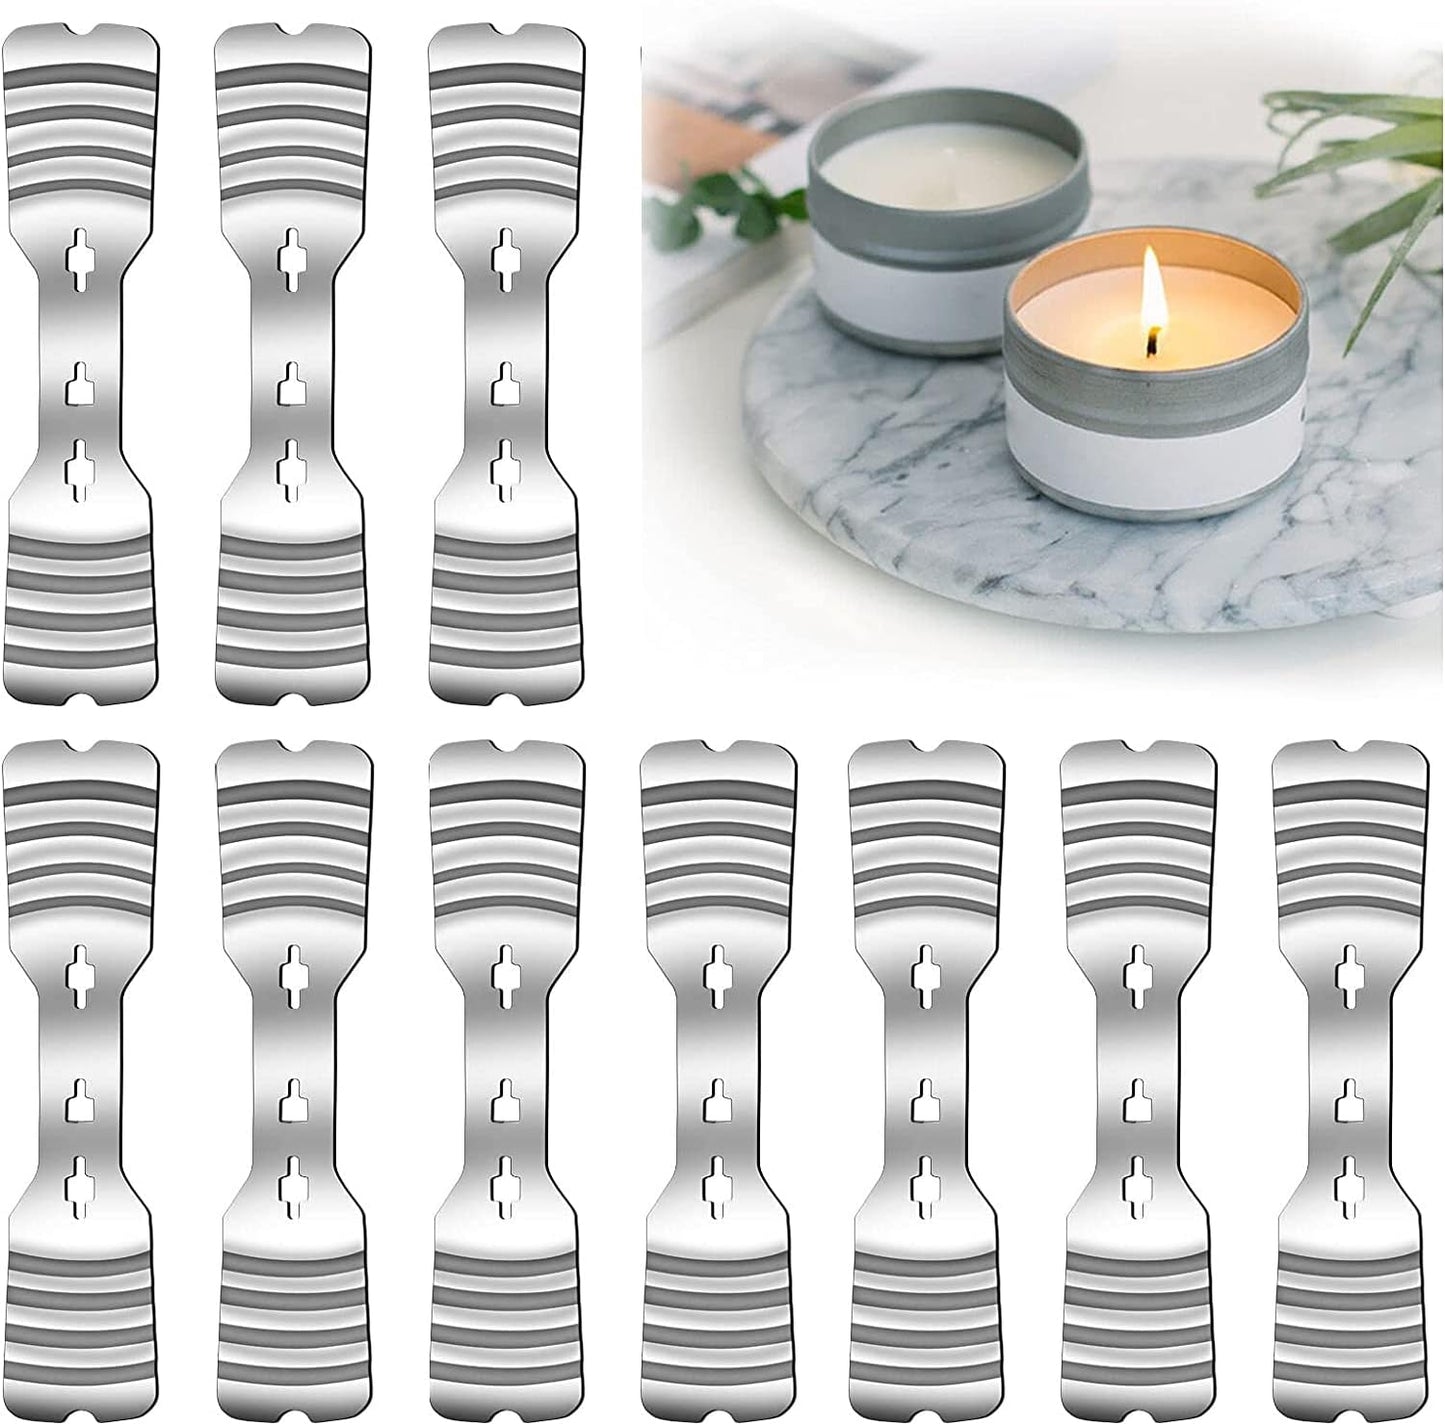 20Pcs Metal Candle Wick Holders, Upgraded Candle Wick Centering Devices, Silver Stainless Steel Candle Wick Holder for Candle Making